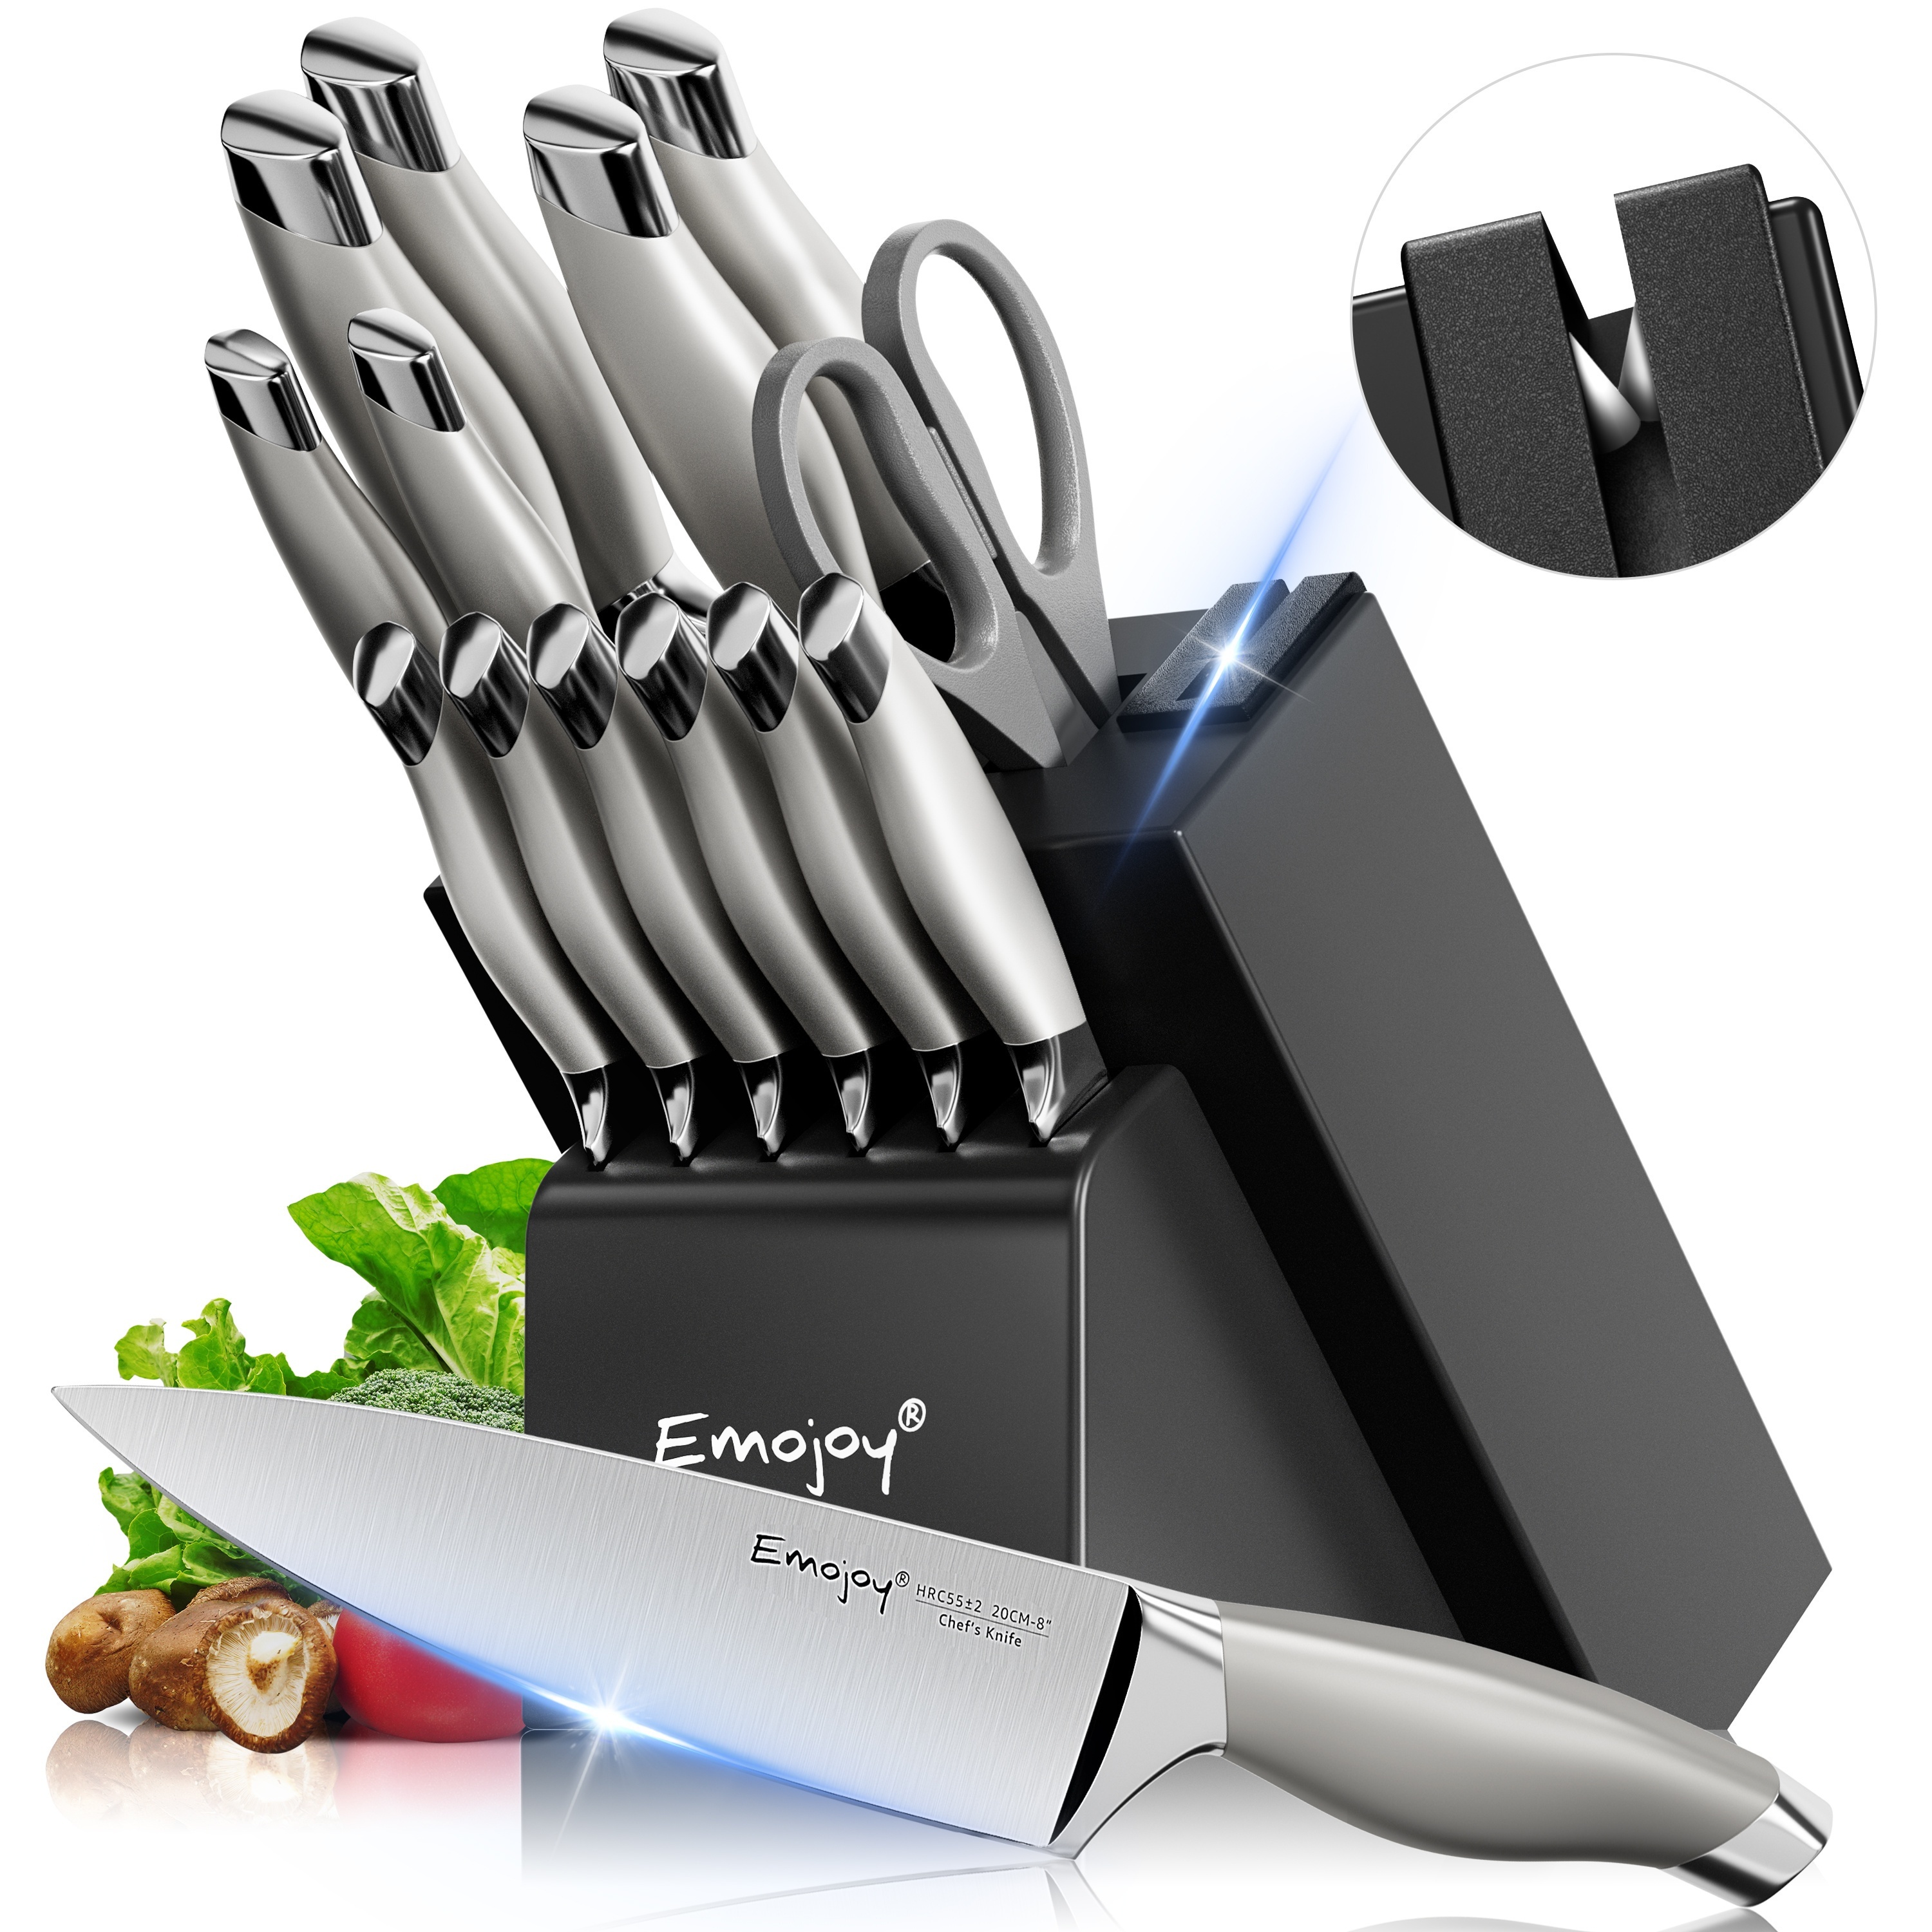 

Emojoy Knife Set With Block, 15 Pieces Kitchen Knife Set With Built-in Sharpener, German Stainless Steel Sharp Chef Knife Set With Hollow Handle, Dishwasher Safe And Rust Proof, Gift For Mom